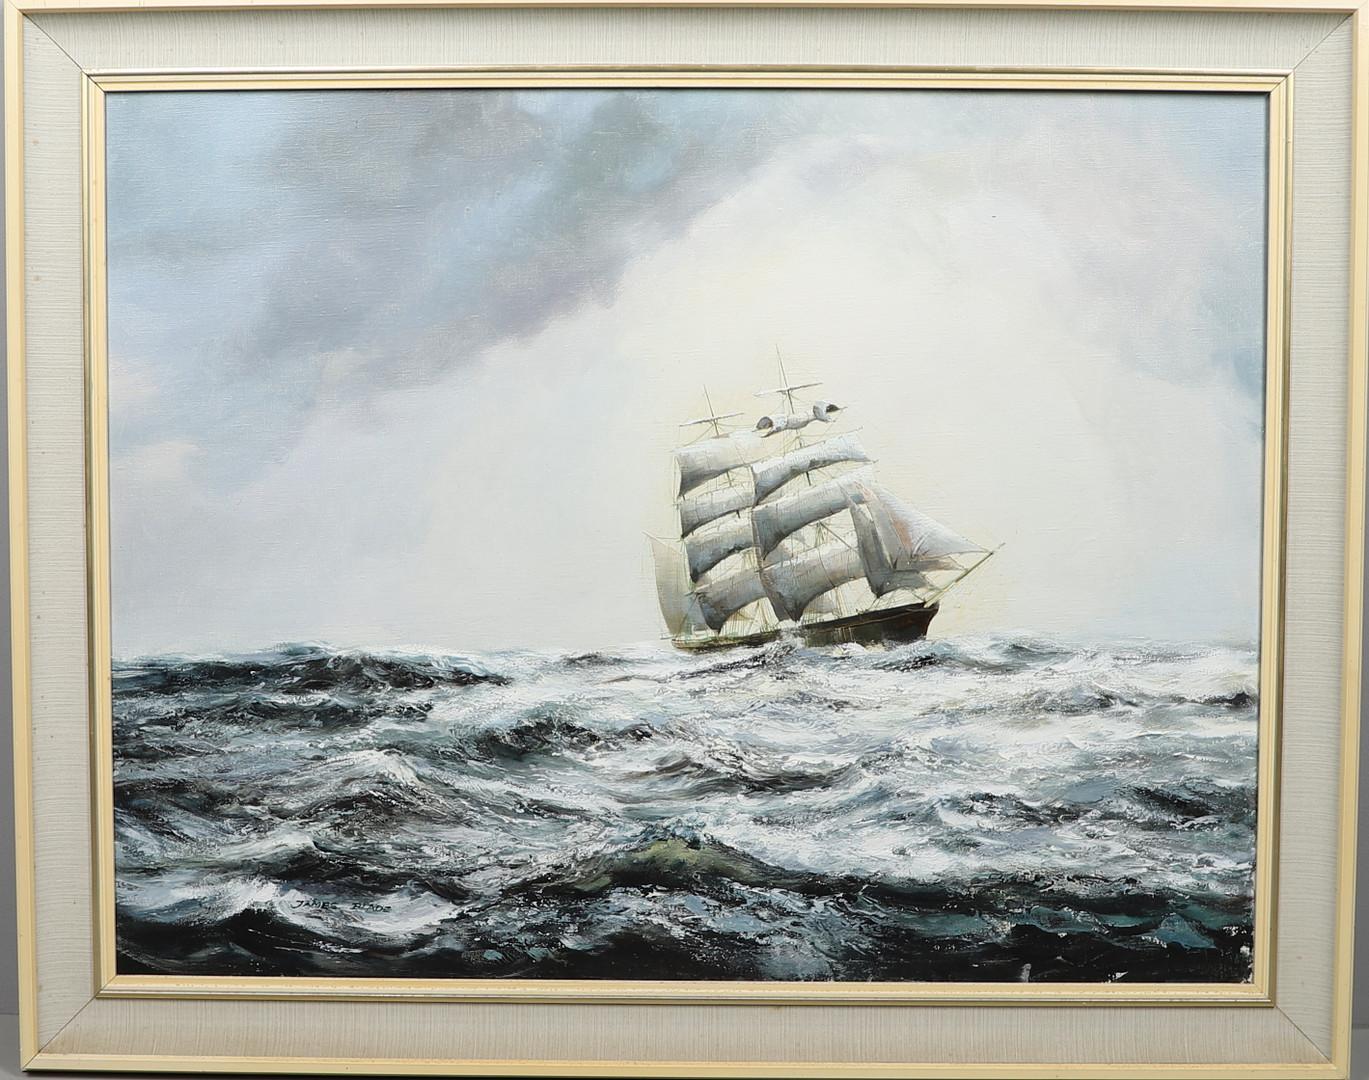 Barque At Sea, Woollahra  - American Realist Painting by James Blade